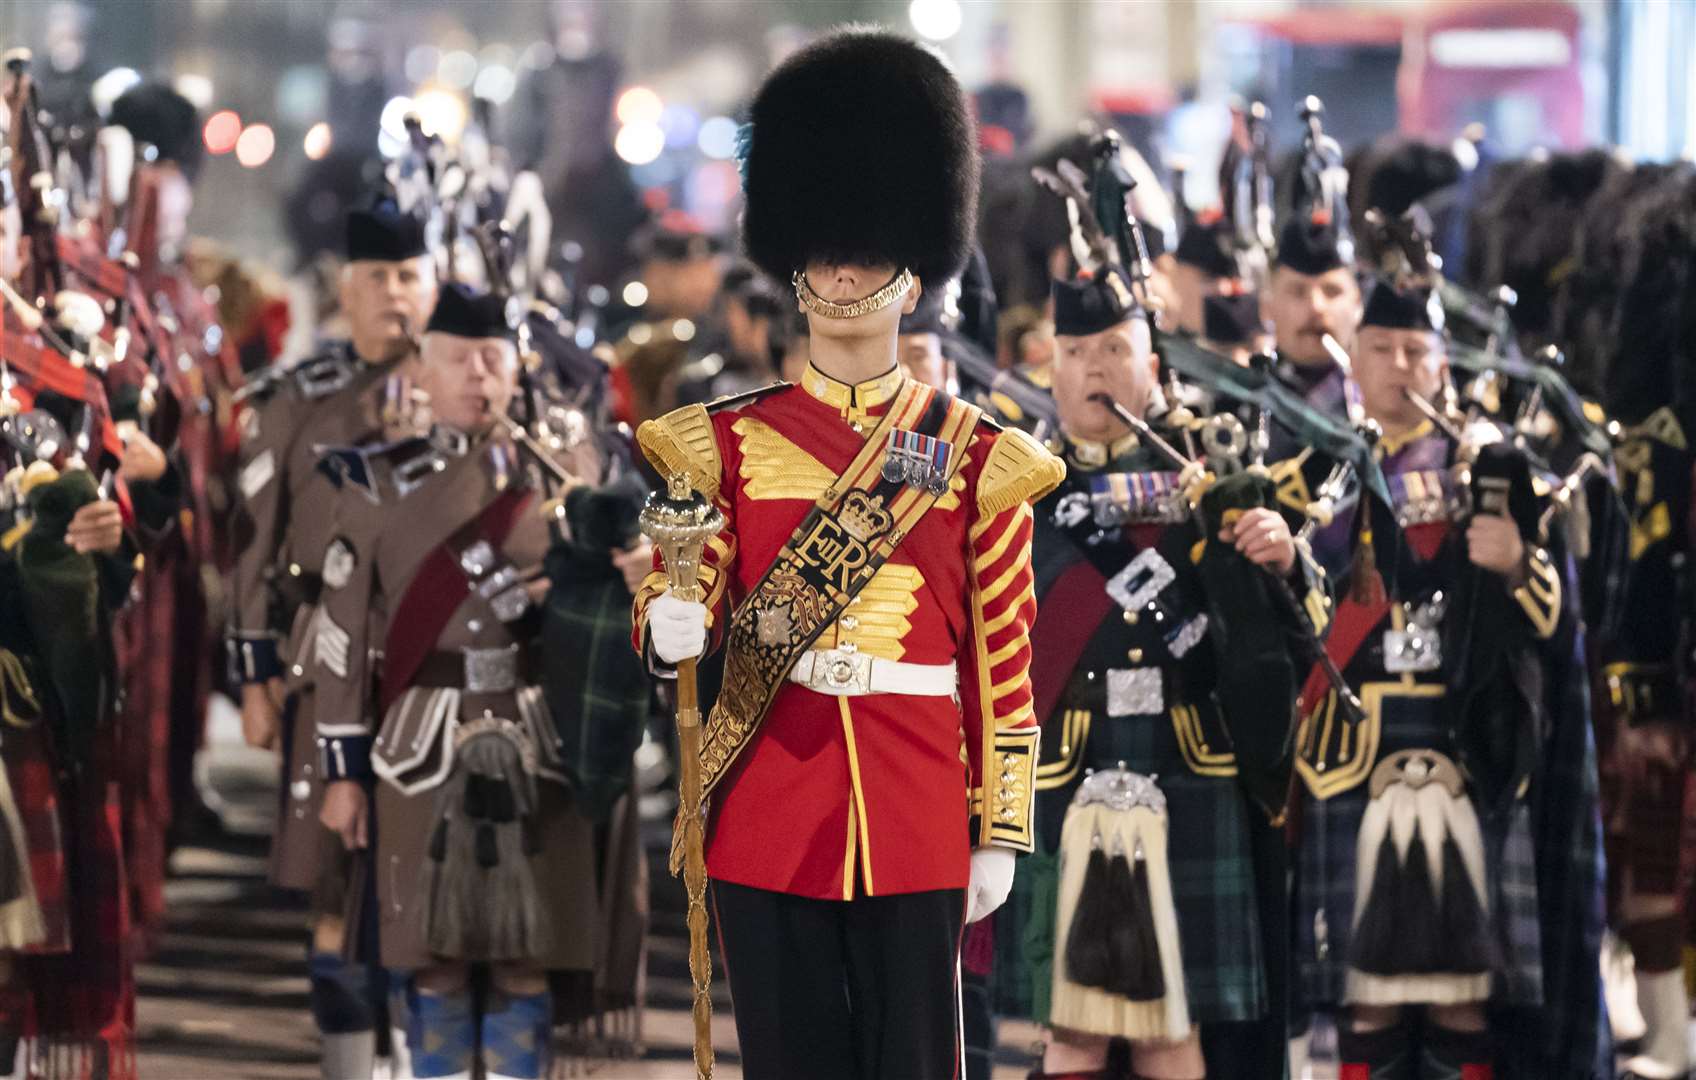 The sound of bagpipes began at 2.45am, signalling the start of the procession (Danny Lawson/PA)